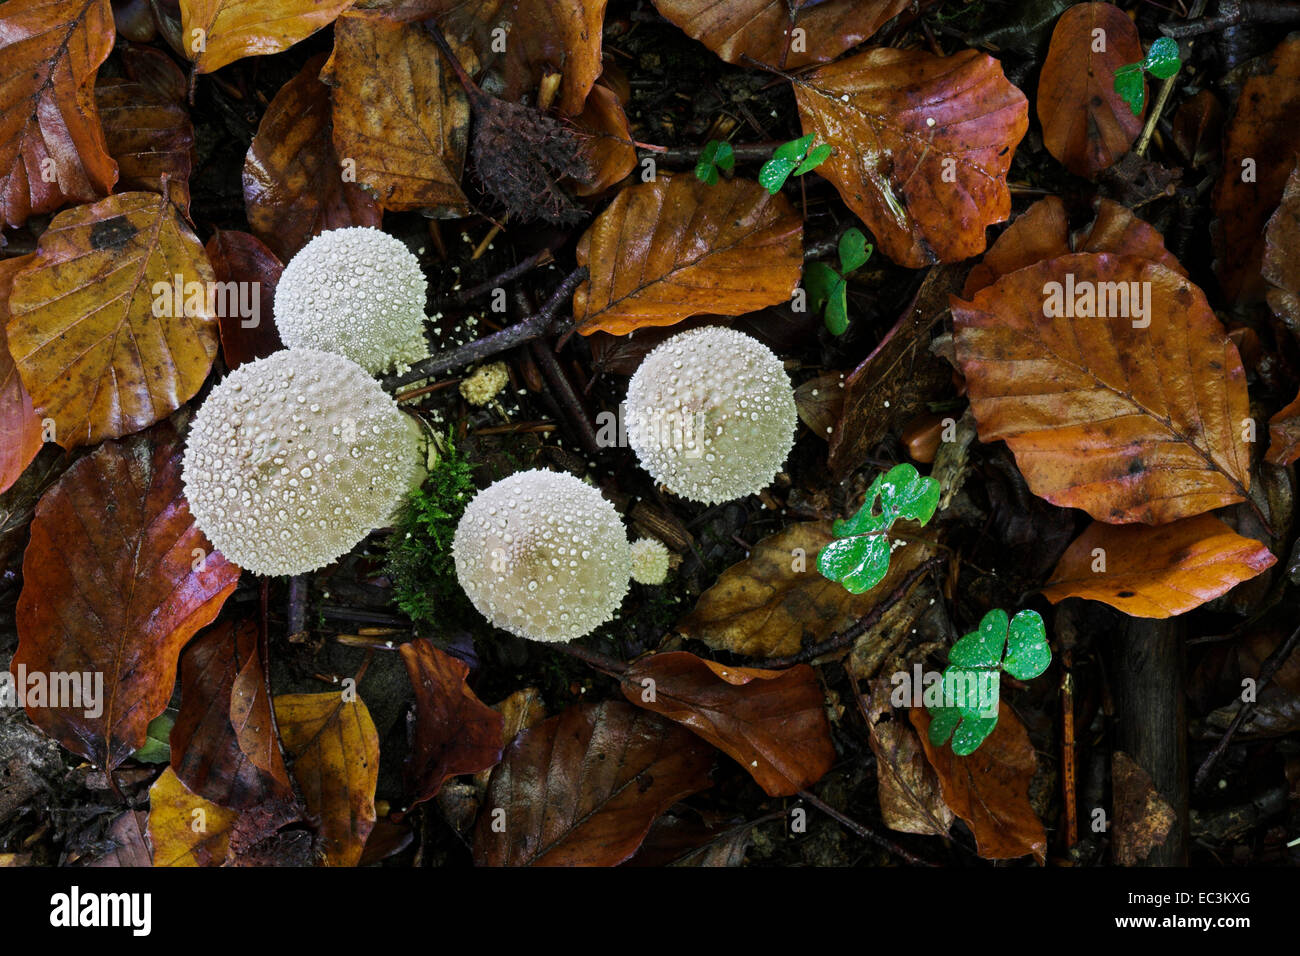 Puff balls growing among the leaf litter on the forest floor. Stock Photo